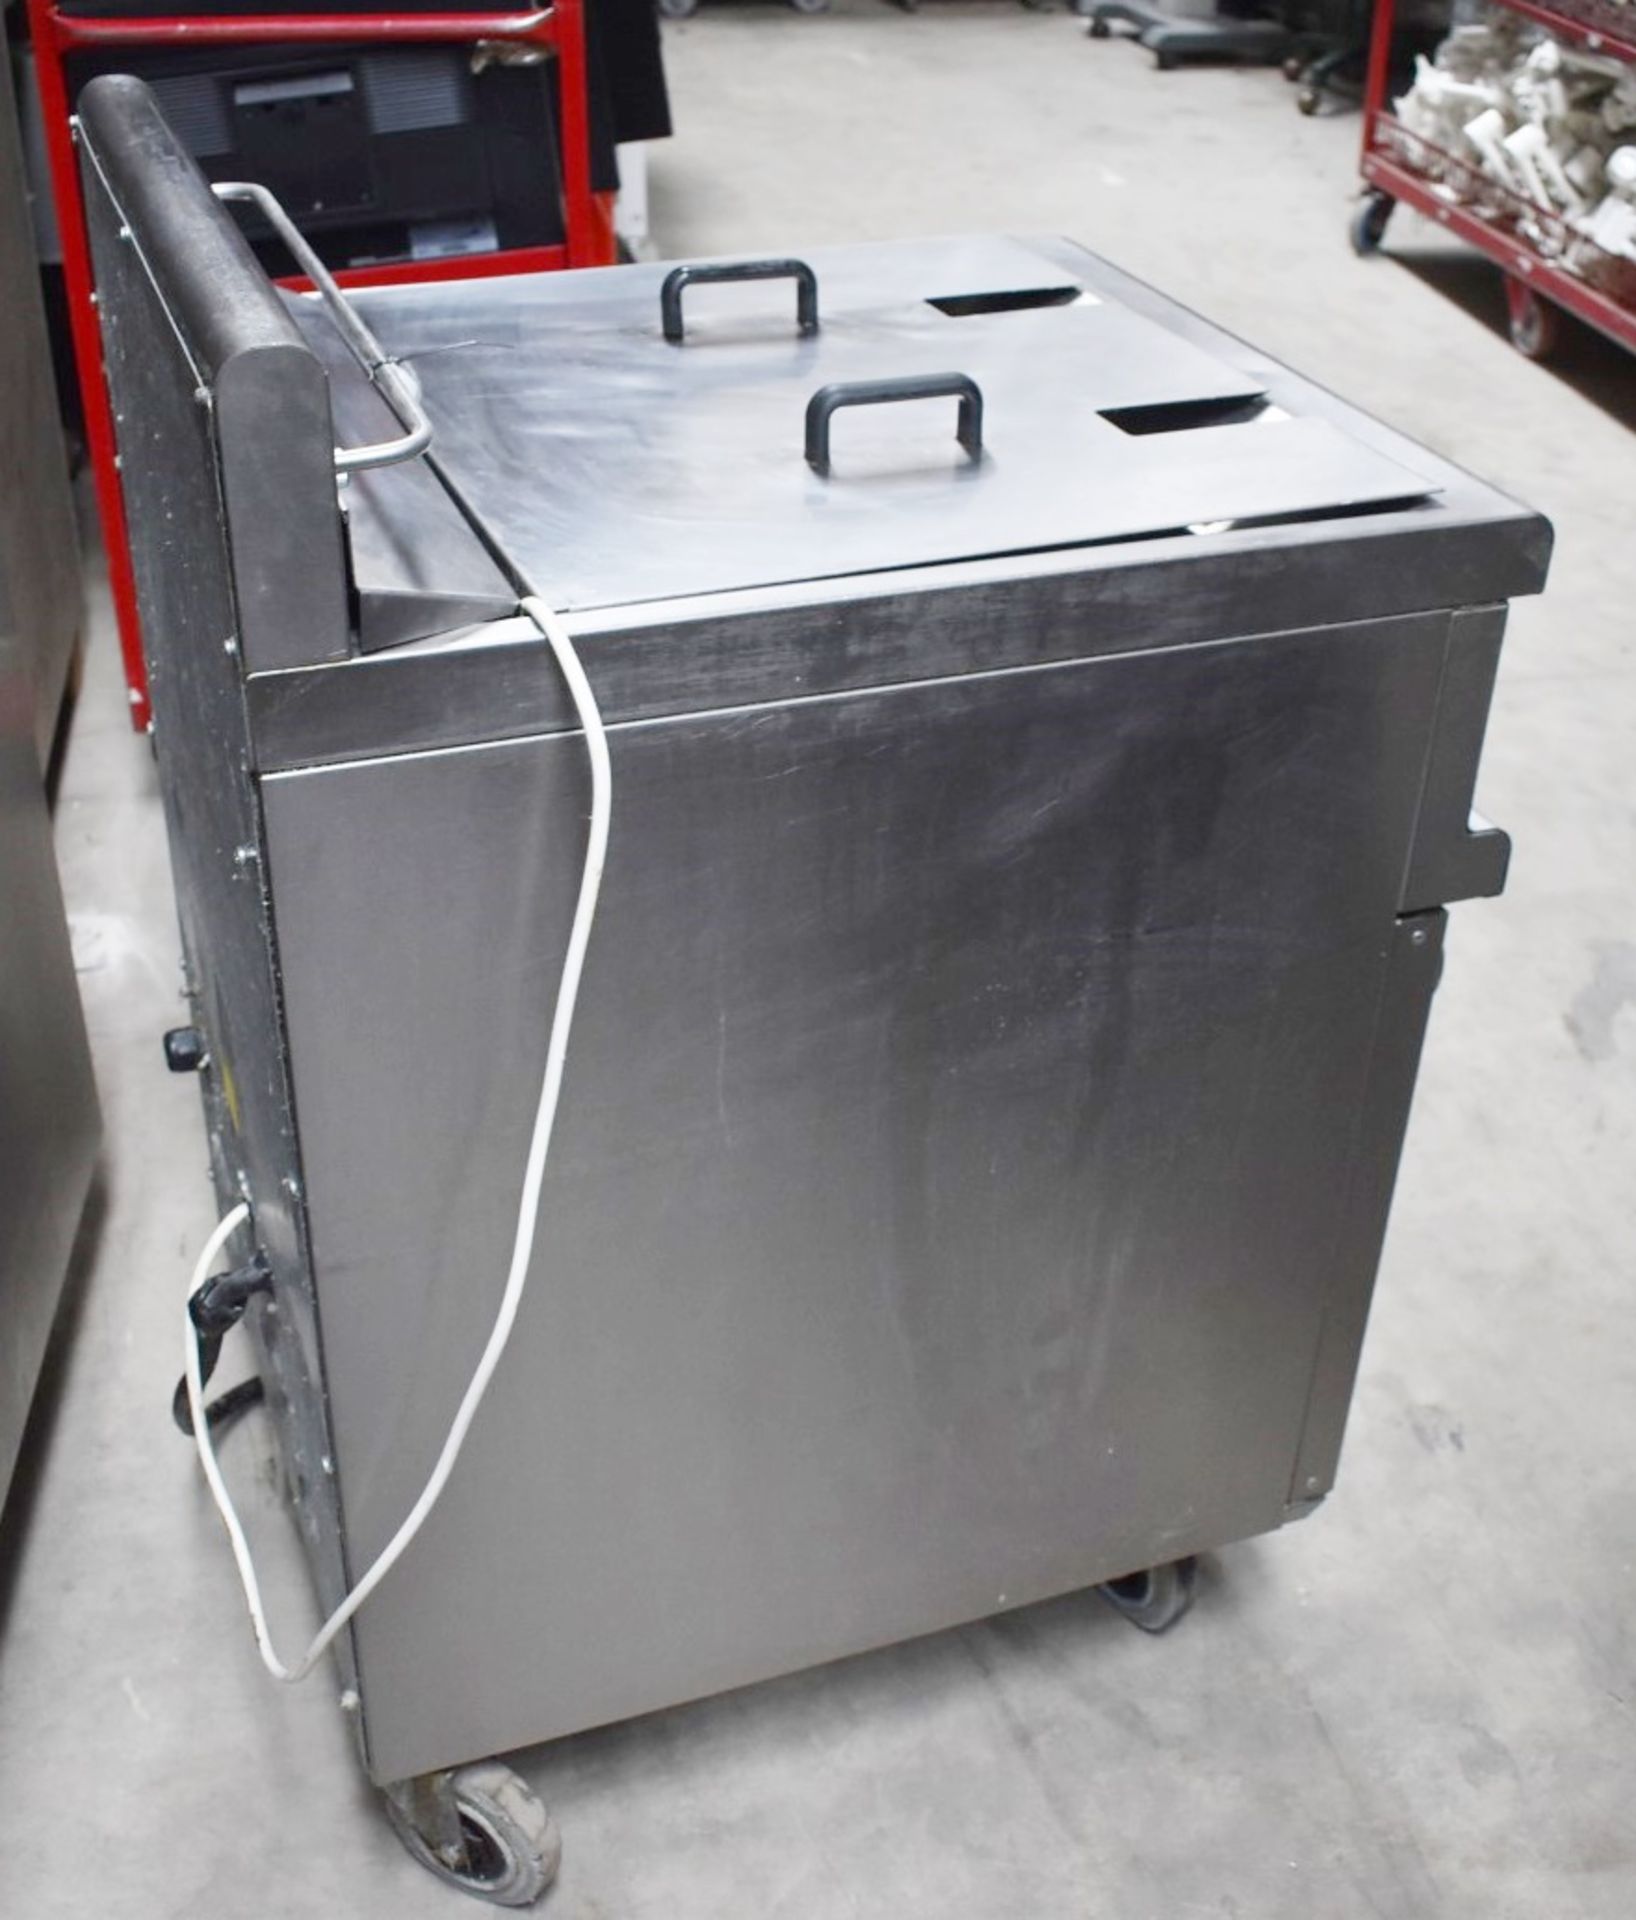 1 x Lincat Opus 700 Single Tank Electric Fryer With Built In Filtration - 3 Phase - Image 7 of 19